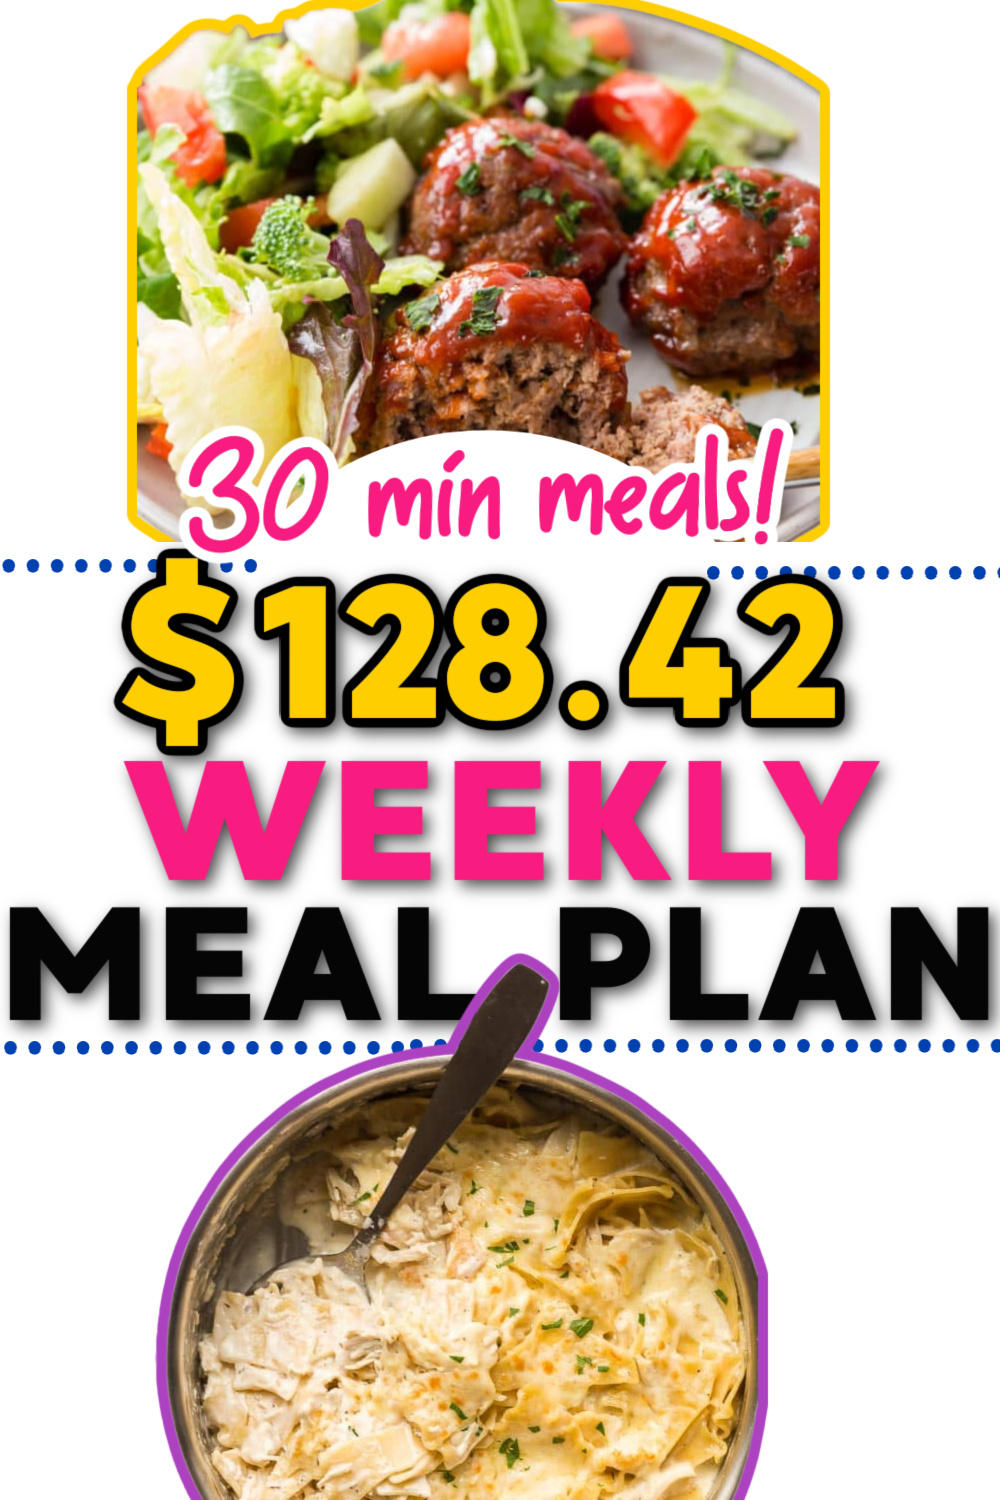 Weekly Family Meal Plan #4 -($128.42) Budget Friendly, Quick & Easy Meals